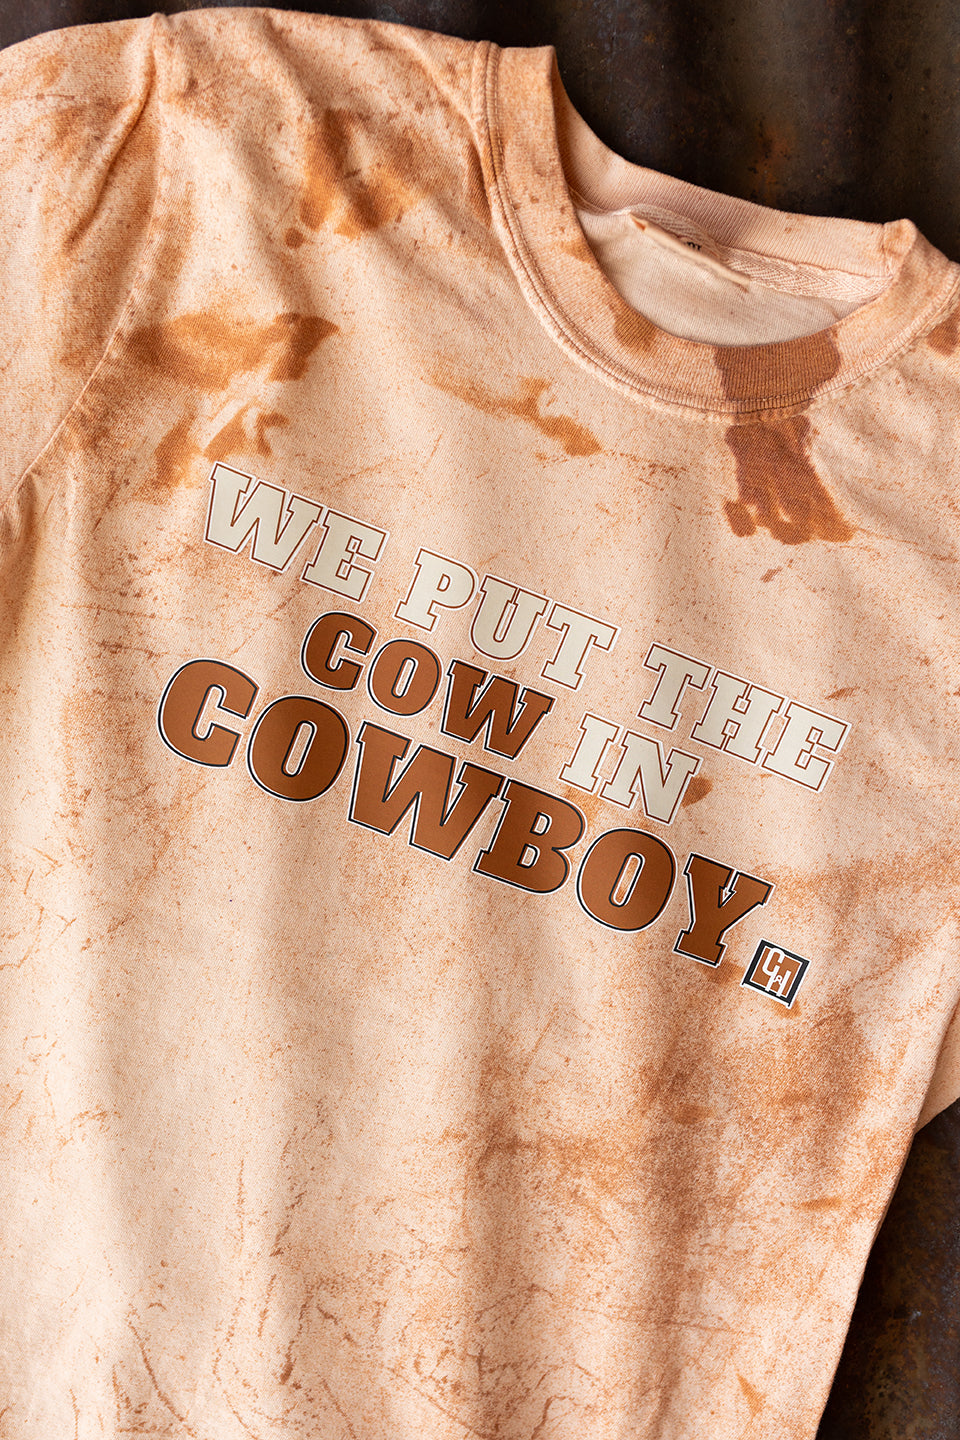 Men's NRCHA "Cow in Cowboy" Graphic Tee